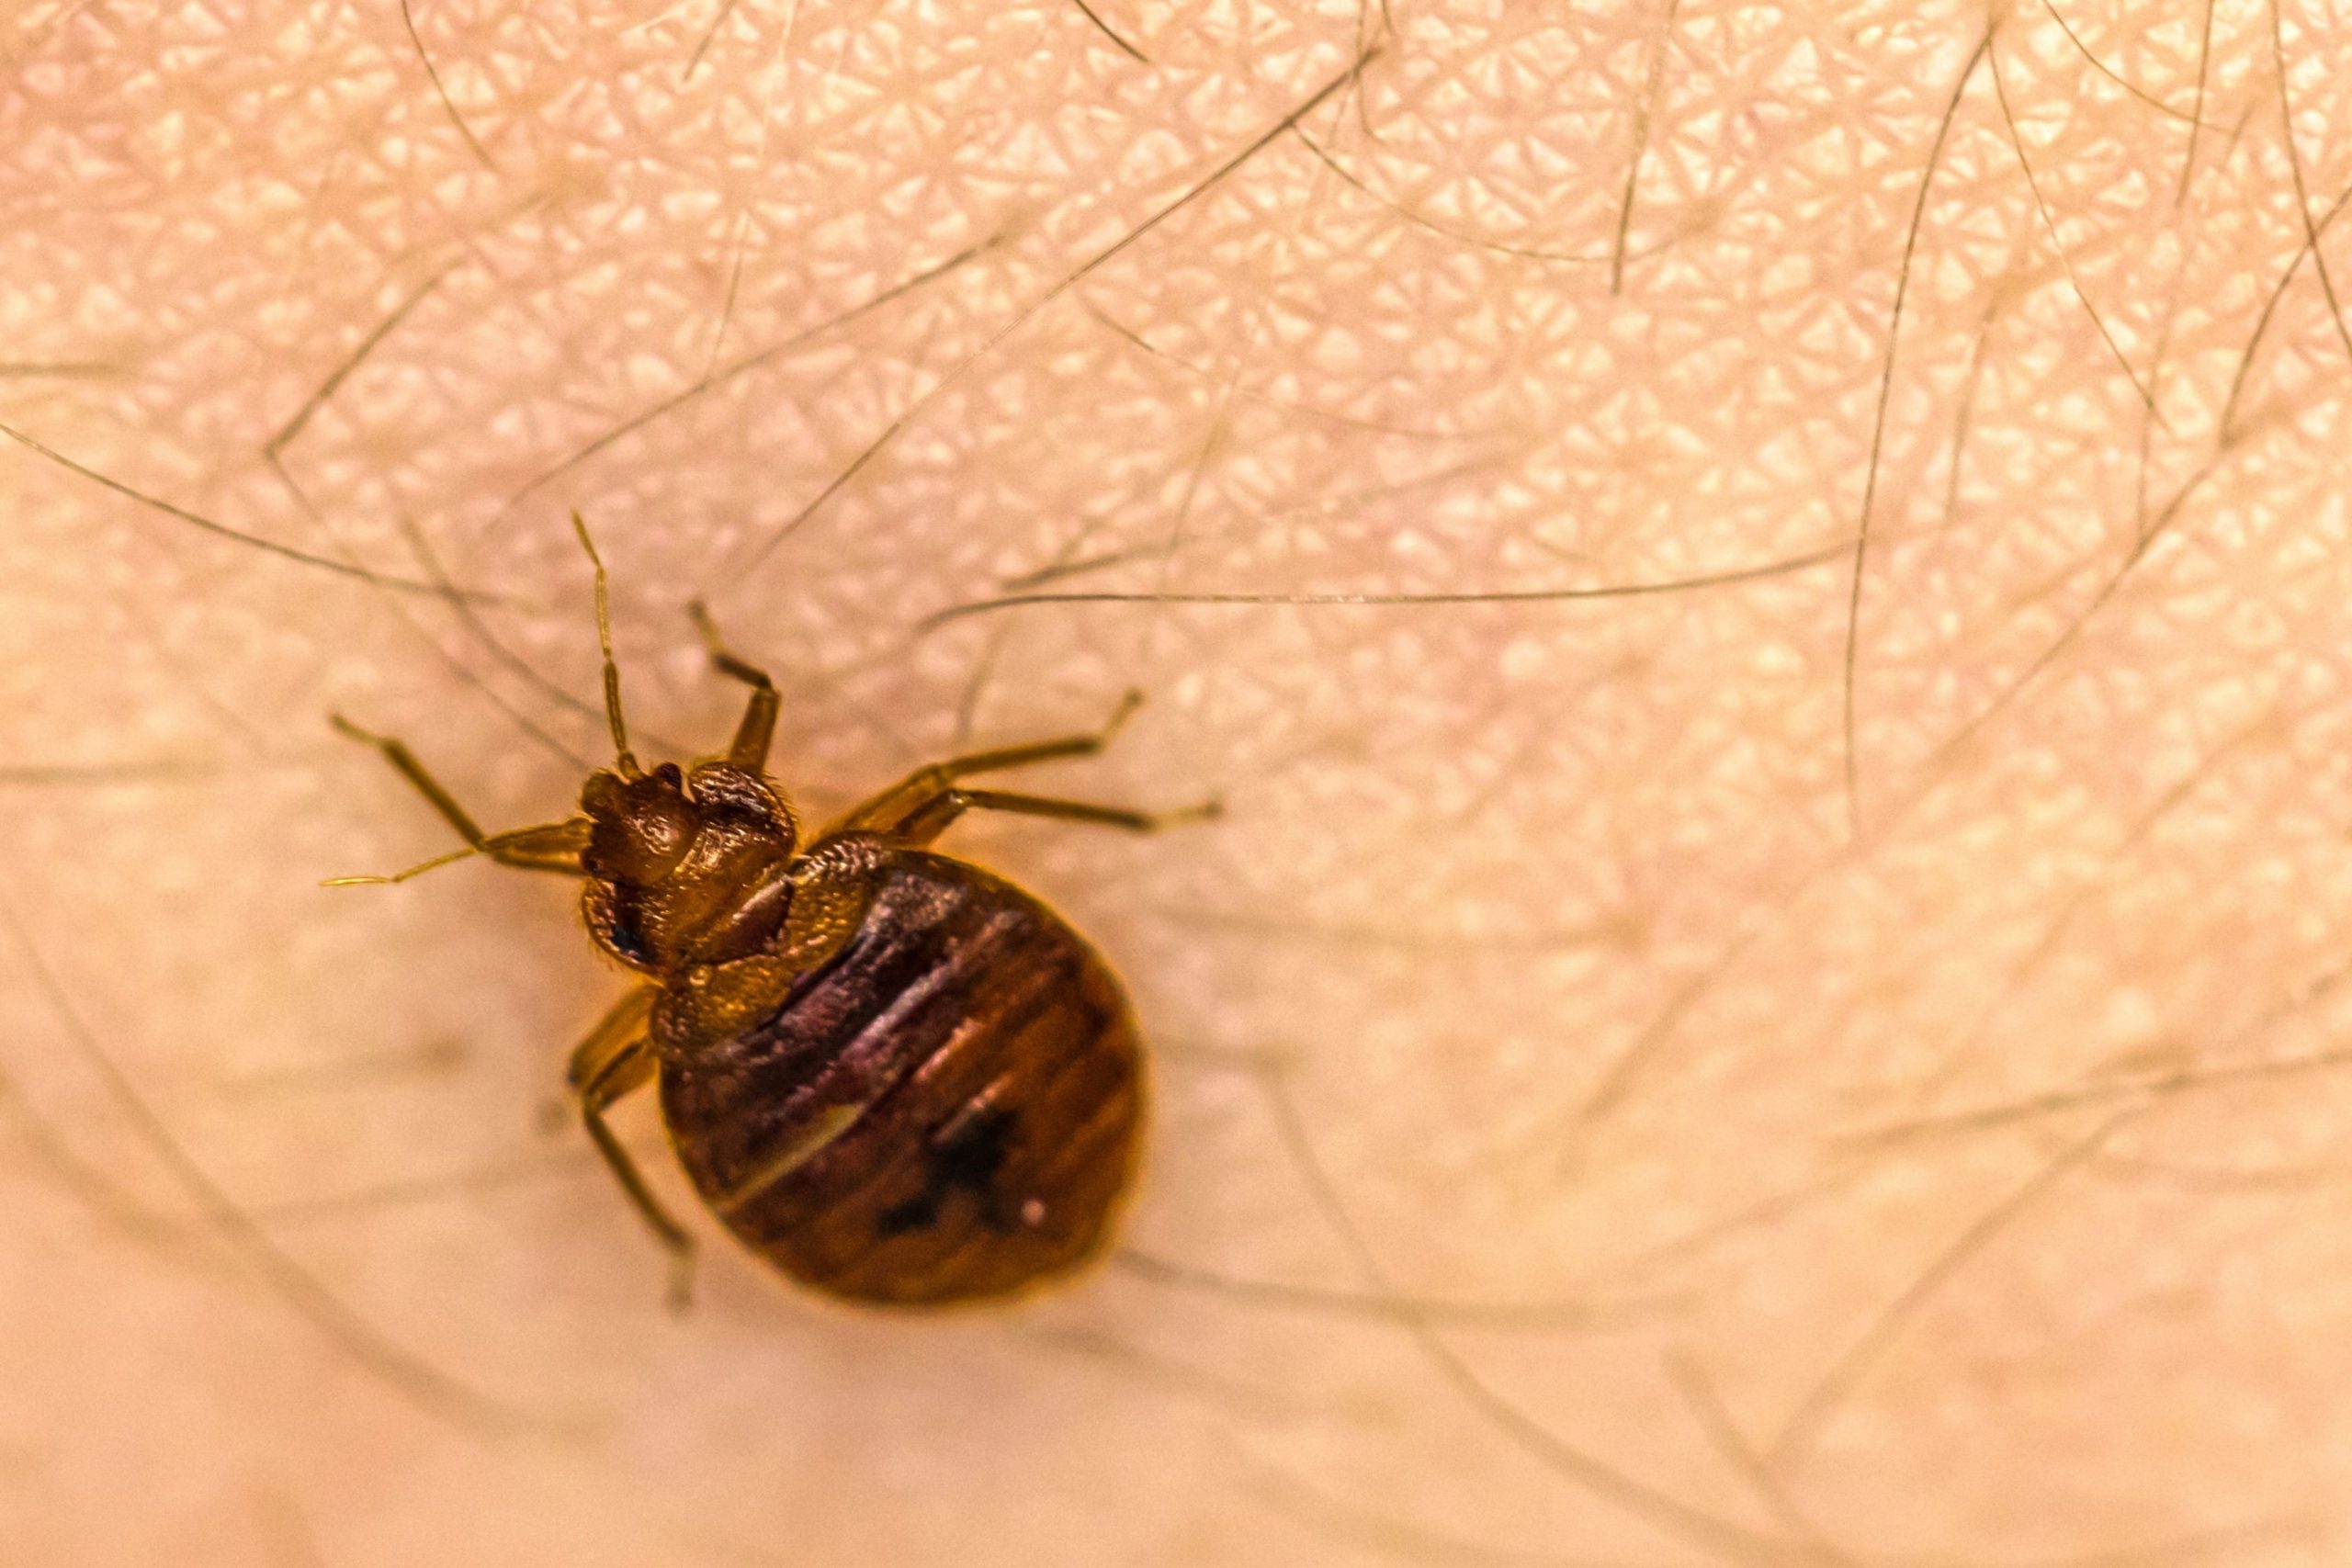 Bed Bugs Are Attracted to Carbon Dioxide